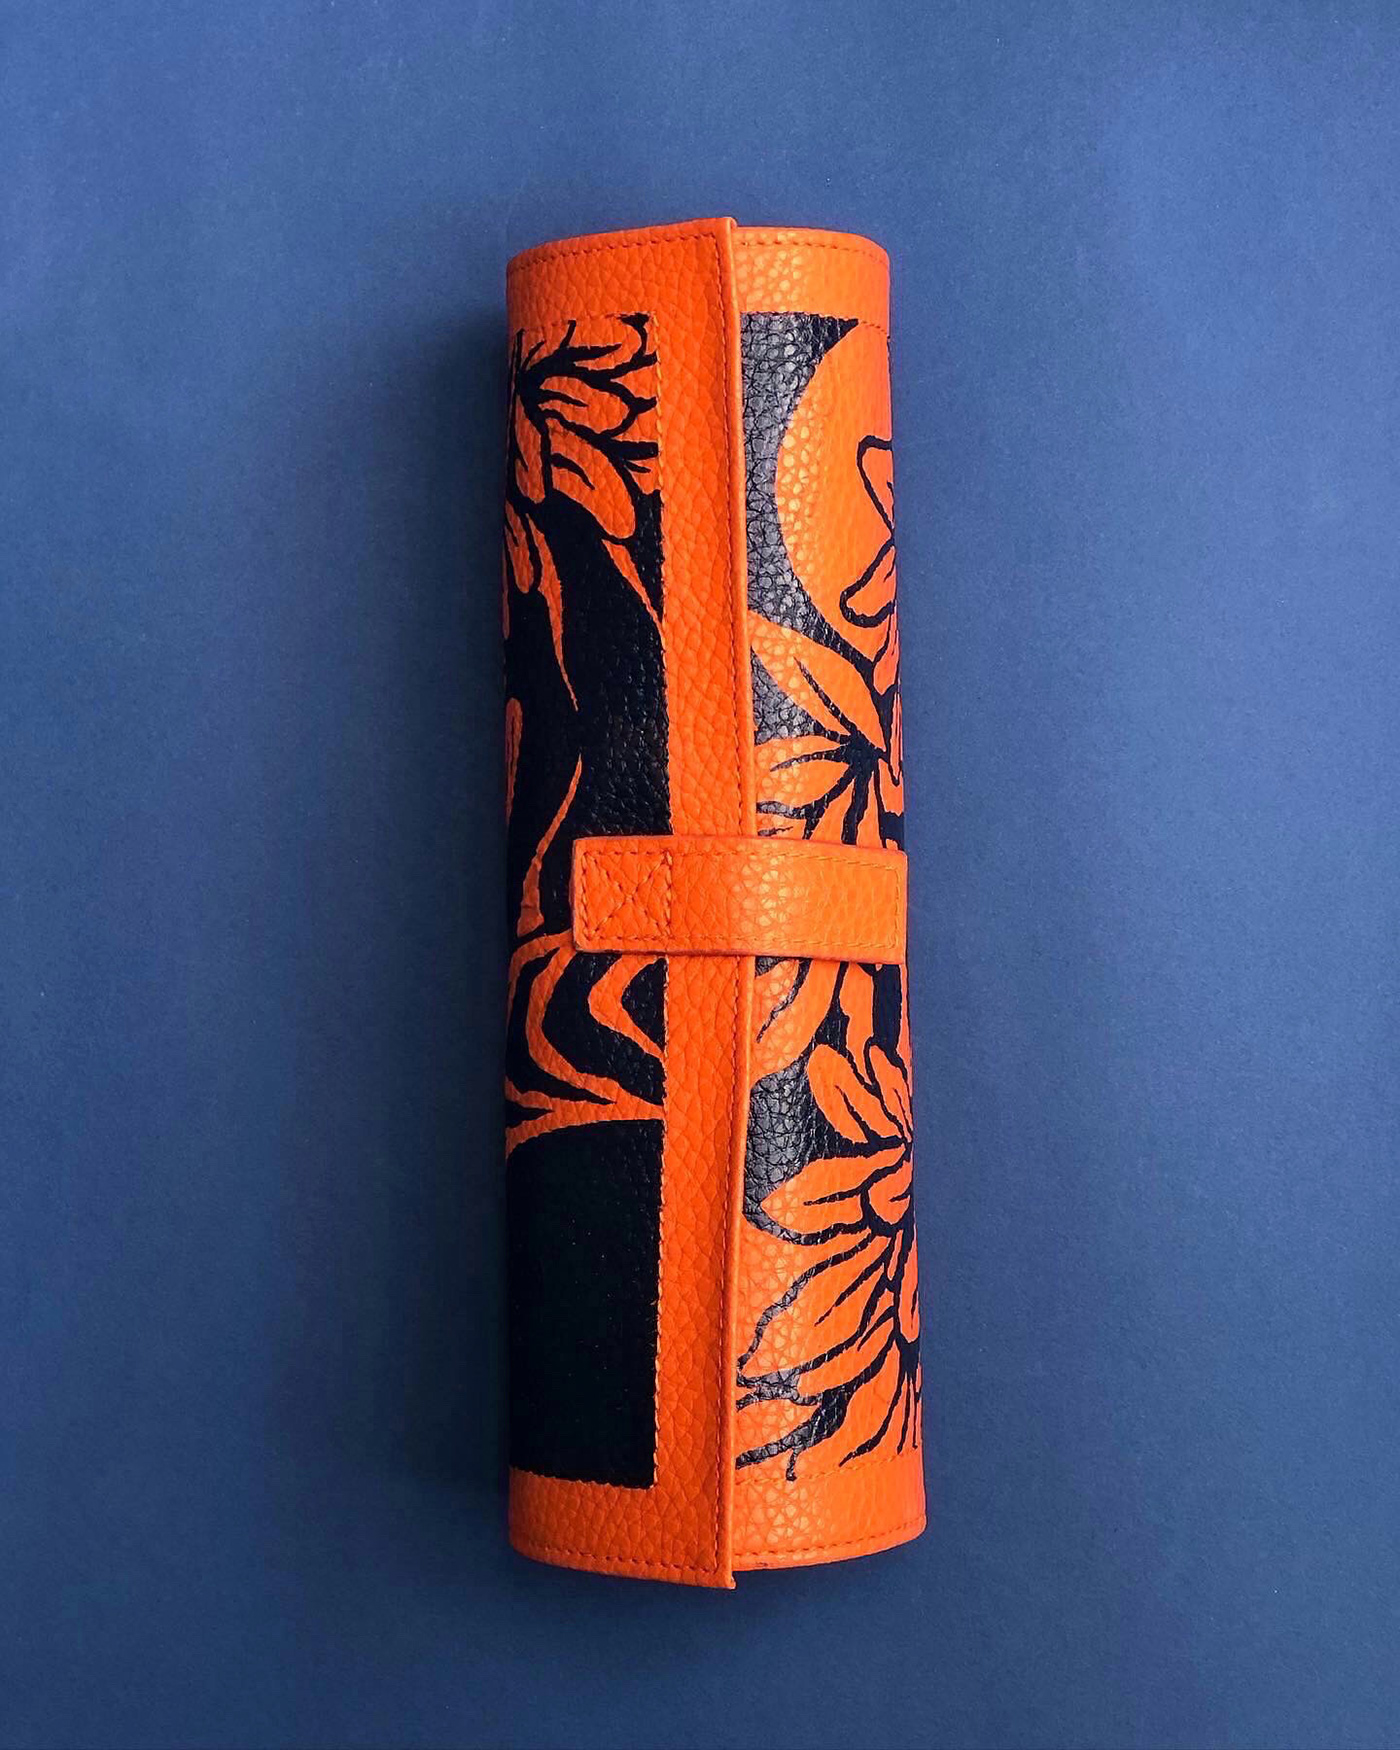 Bespoke artwork: Hand-painted leather product illustrating the 'Year of the Tiger', by Shann Larsson